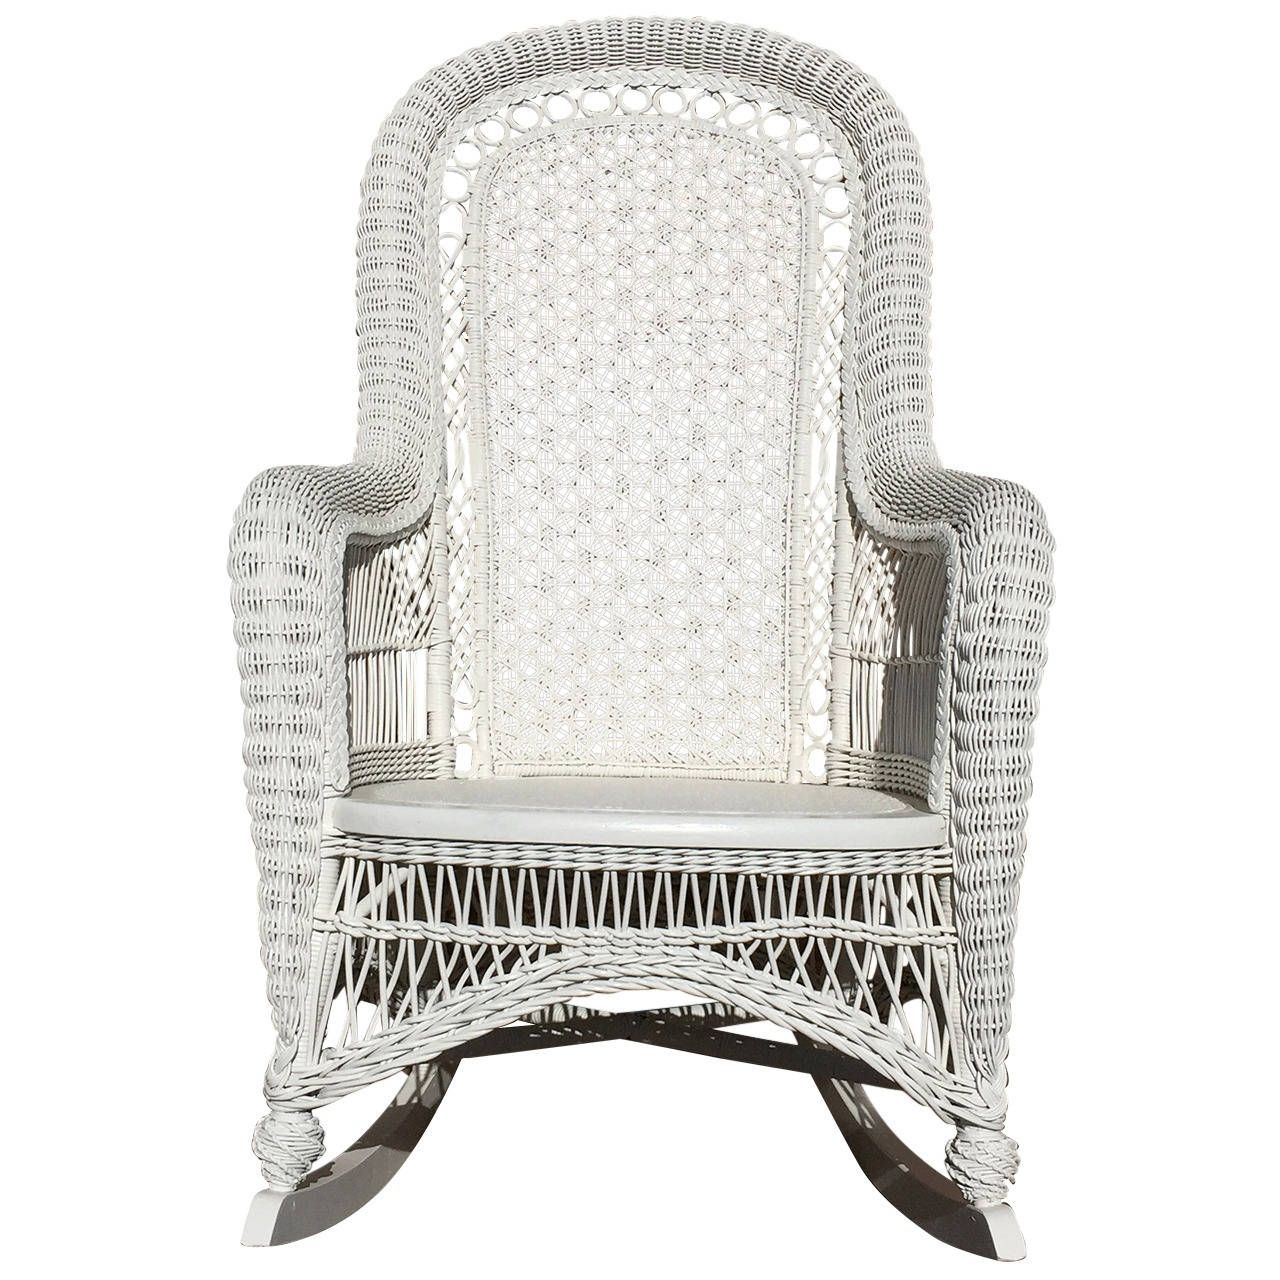 Antique Victorian Wicker Rocker At 1stdibs For White Wicker Rocking Chairs (View 15 of 15)